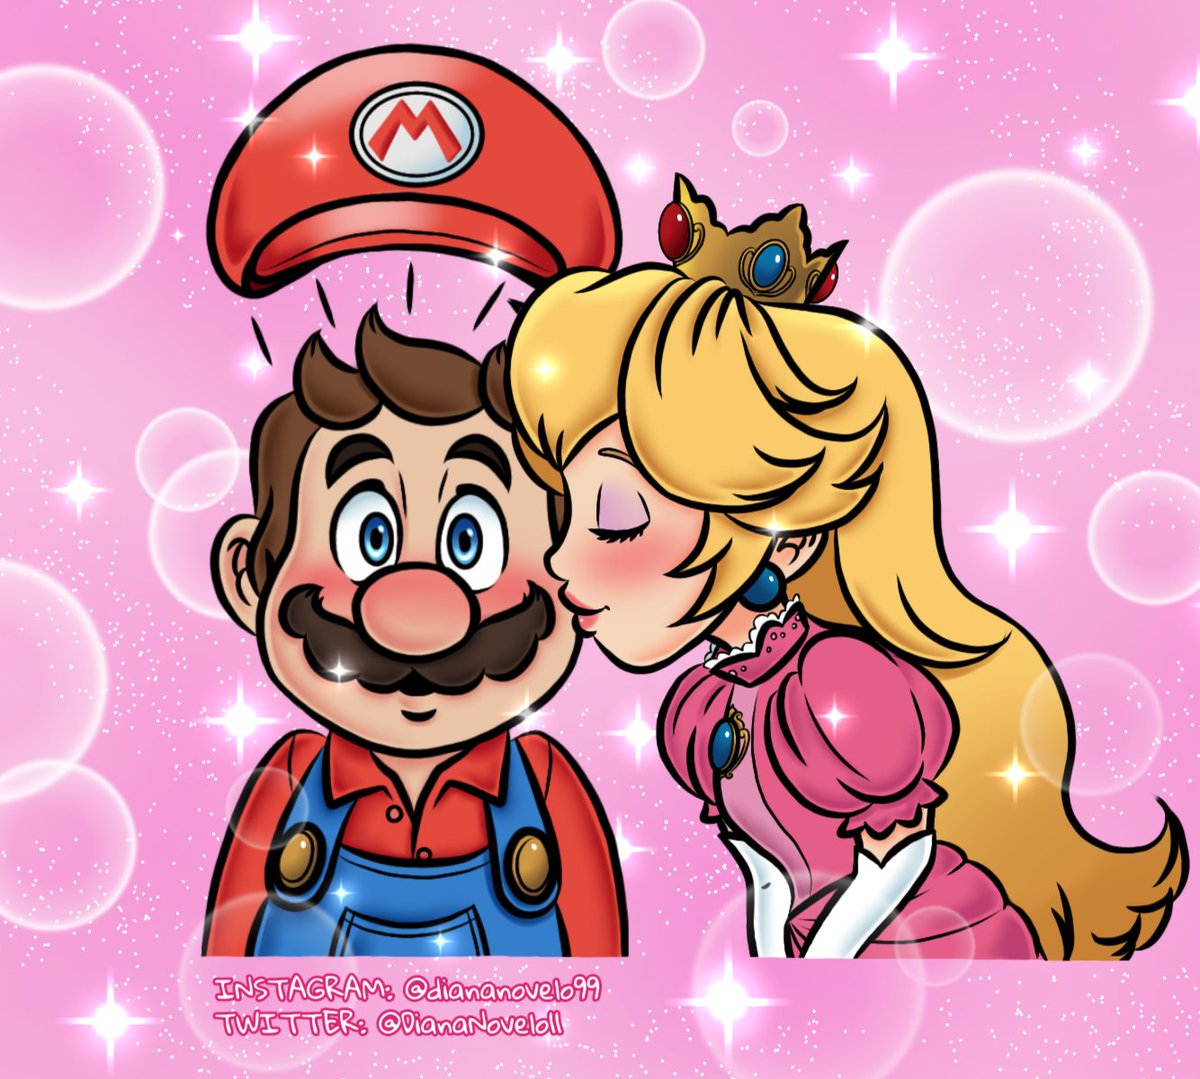 Happy Valentine's Day! 🩷❤️✨
I wanted to draw more Mareach this year, so what a perfect day to do so than today! 💕
#ValentinesDay #MarioMovie #SuperMarioBros #Mareach #MarioxPeach #PrincessPeach #TheSuperMarioBrosMovie